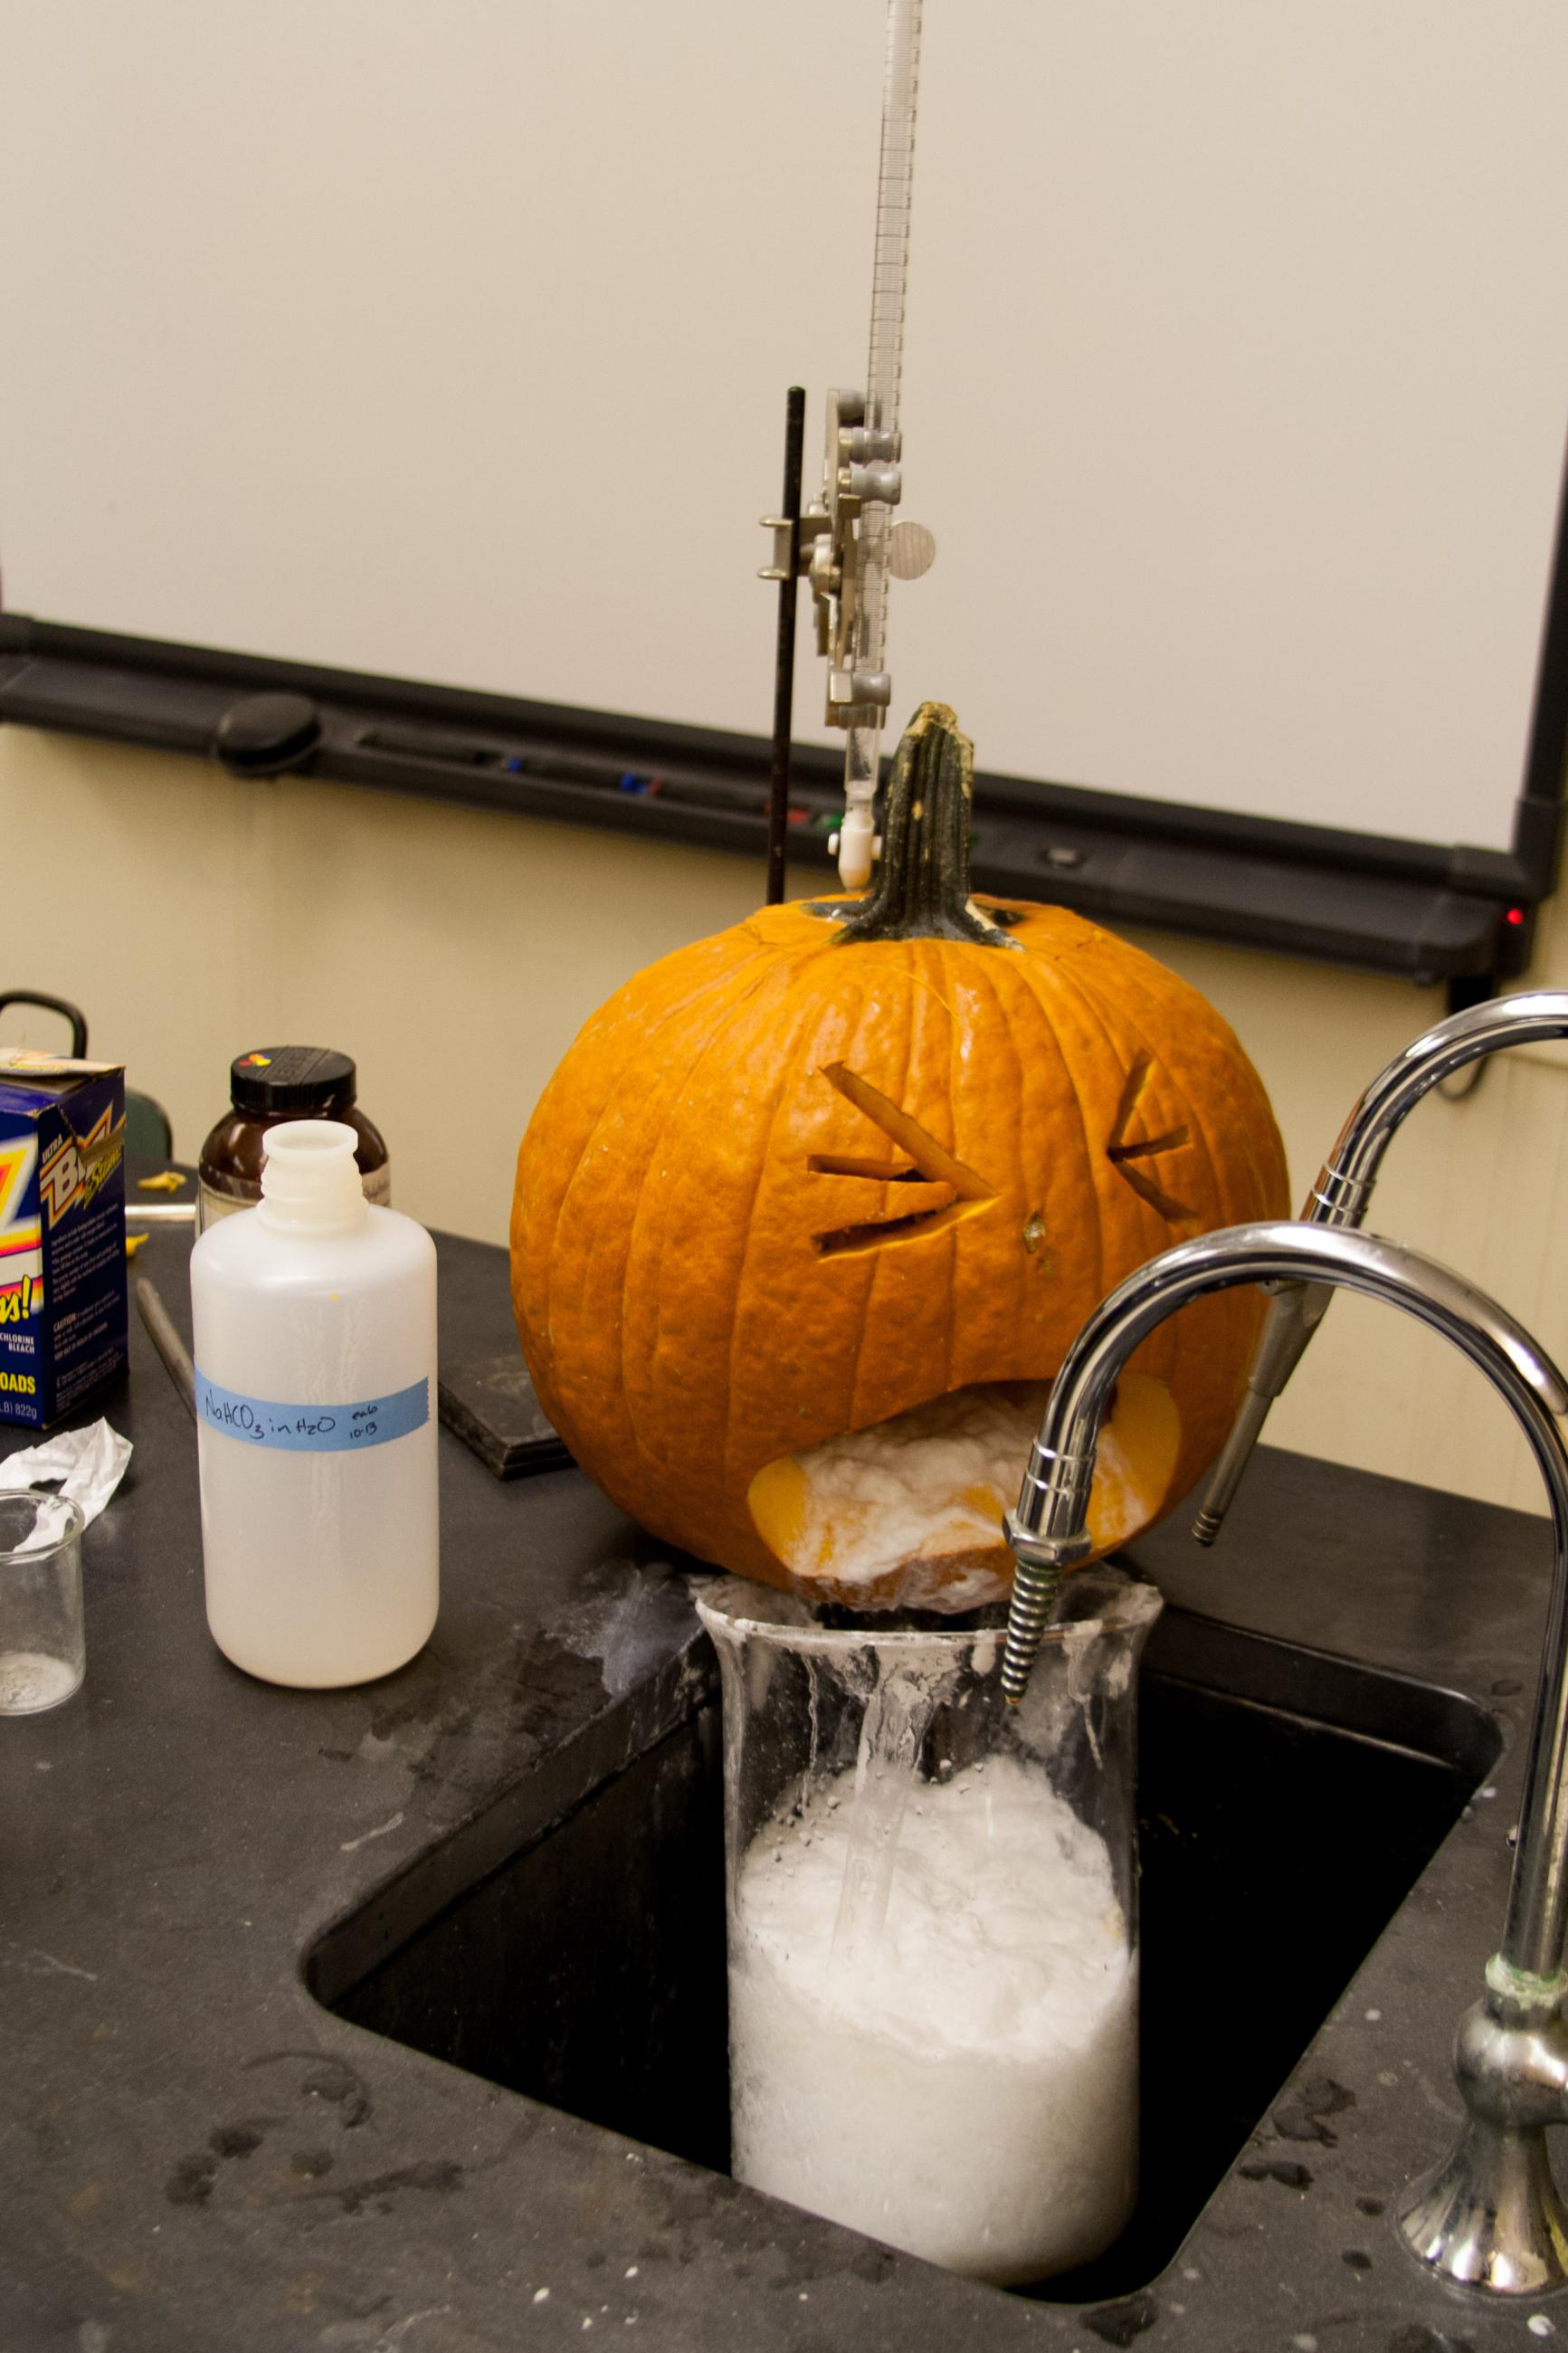 Previous Haunted Lab experiment